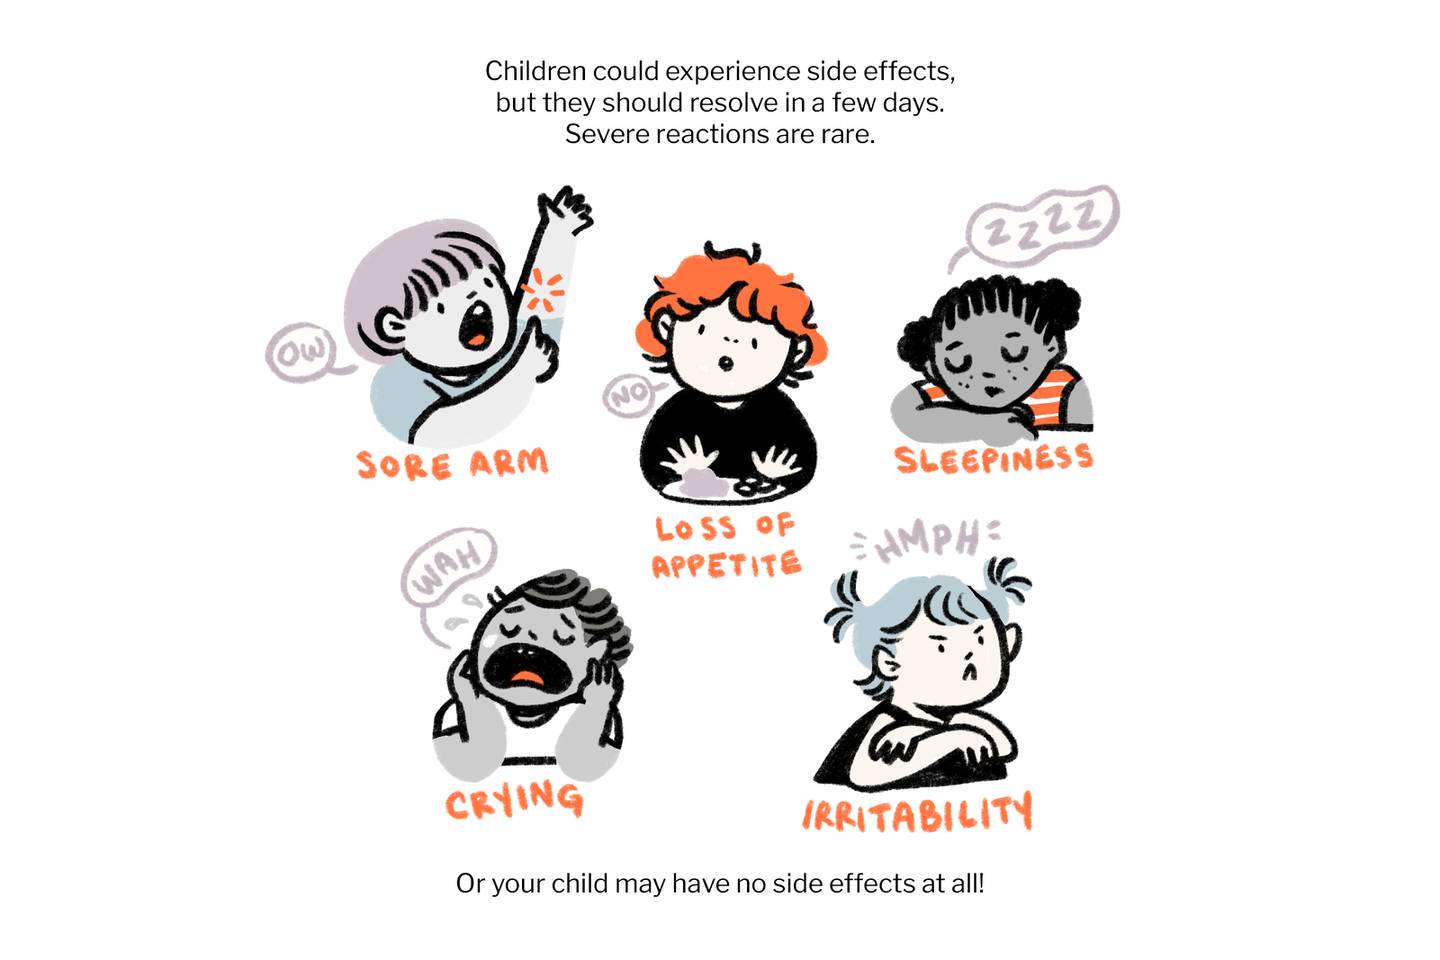 Children could experience side effects: sore arm, loss of appetite, sleepiness, crying, or irritability. They should resolve in a few days.